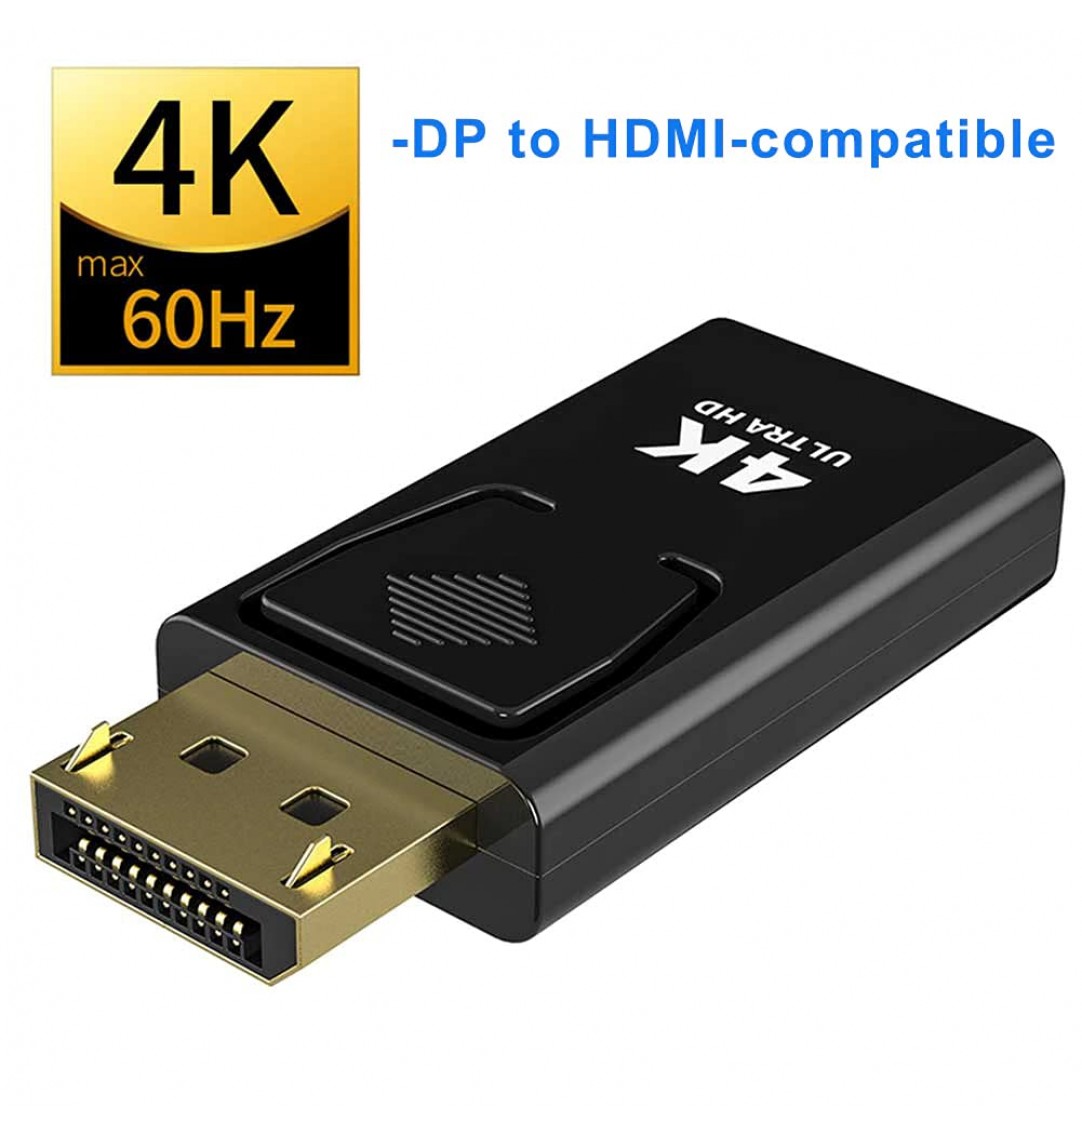 DP TO HDMI COMPACT